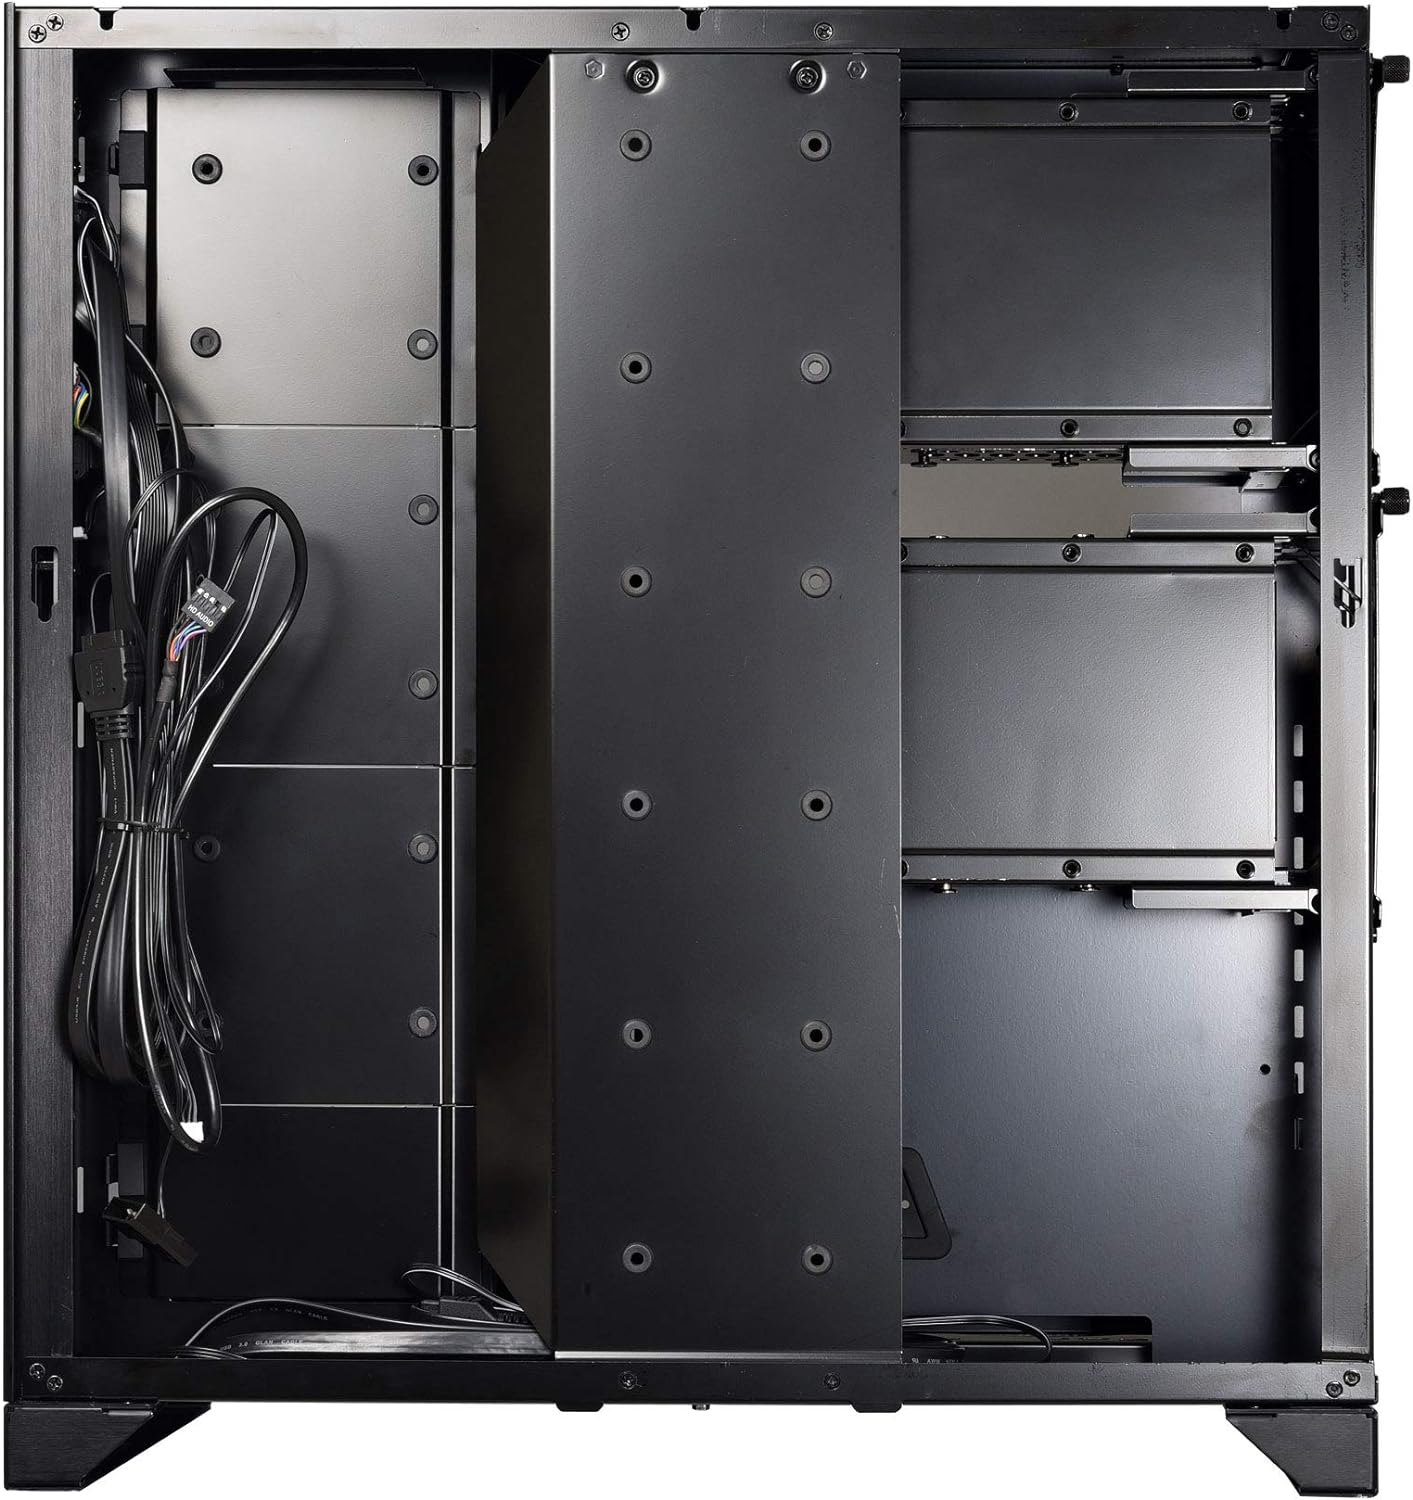 Premium full tower case designed for ATX motherboards with ample space 0840353009837